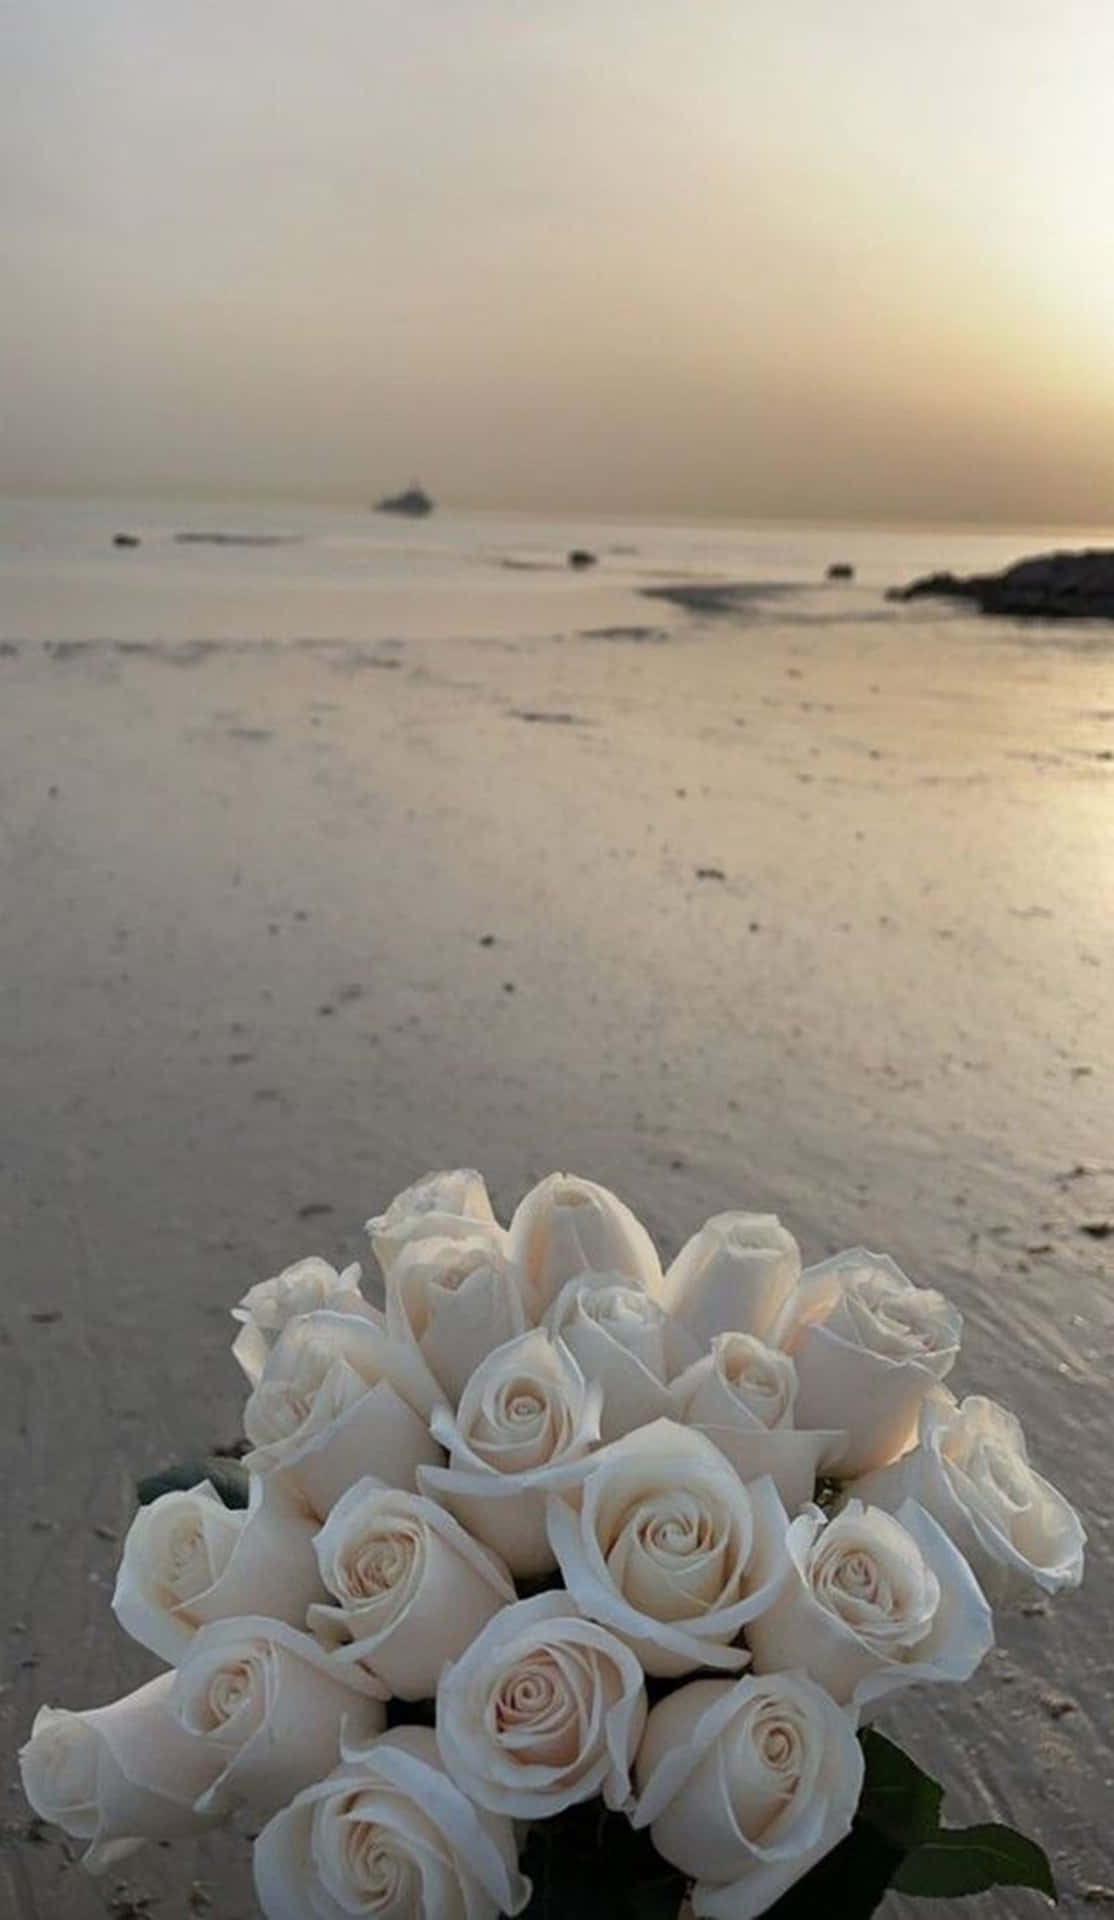 Majestic Aesthetic of a White Rose Wallpaper